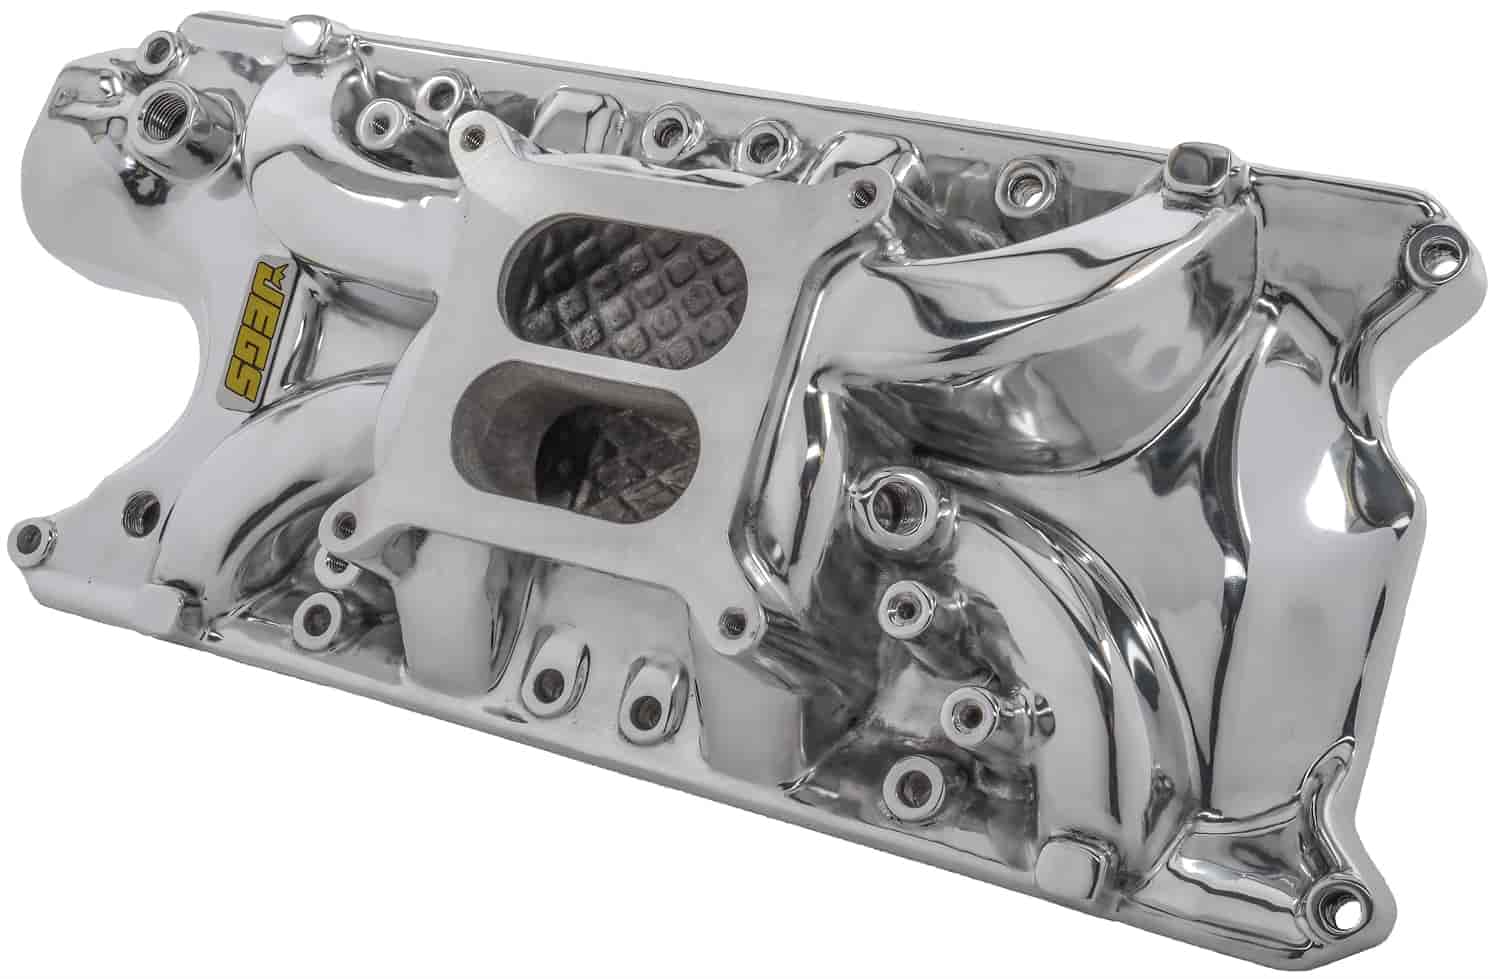 Jegs 513018 Intake Manifold For Small Block Ford 289 302 Except Boss Square Flange Jegs